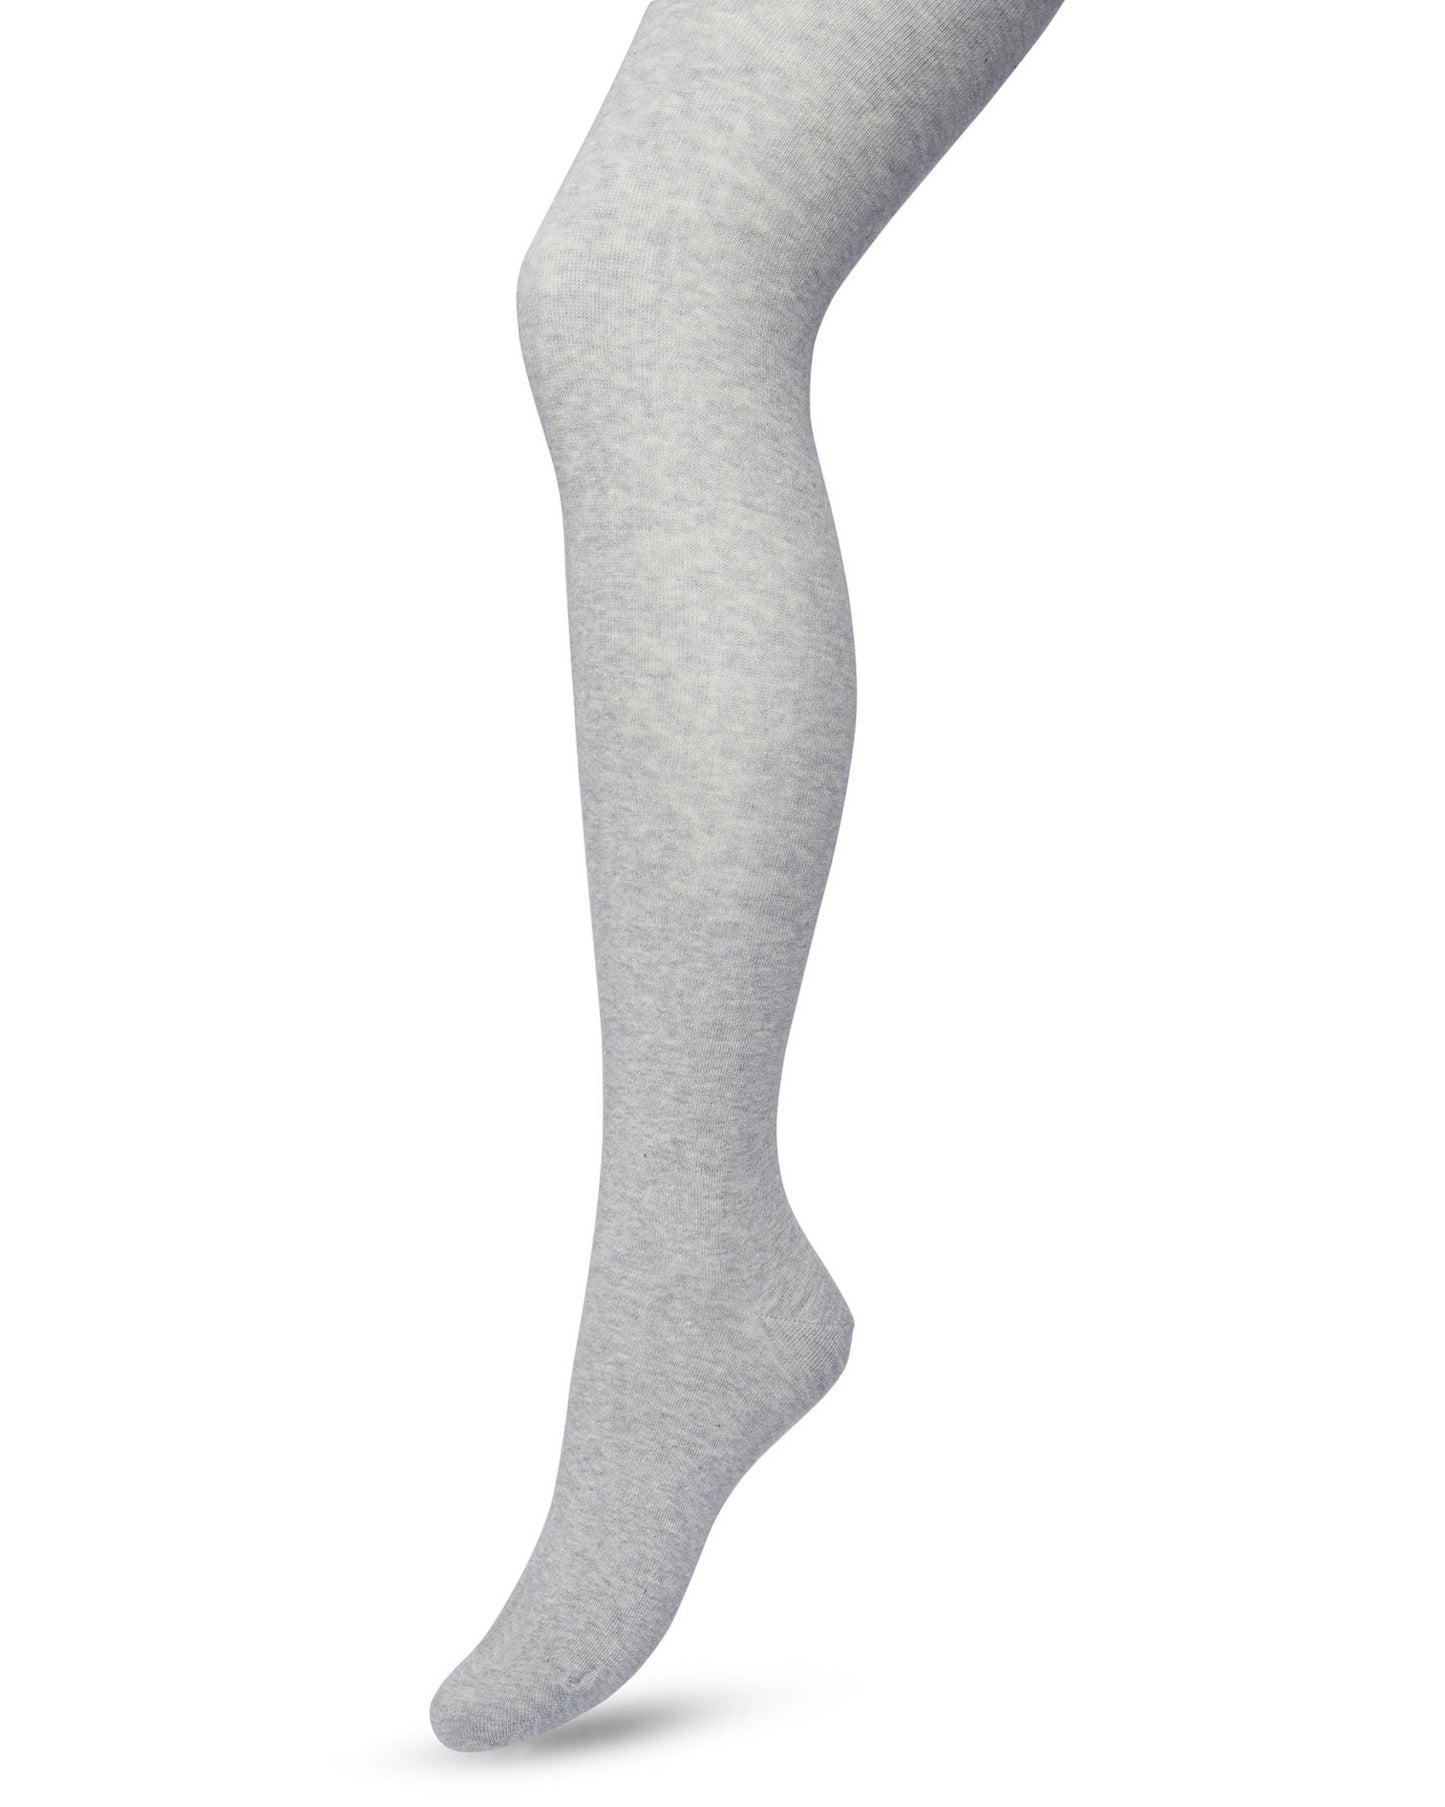 Bonnie Doon Bio Cotton Tights - Light grey warm and soft knitted organic cotton Winter thermal tights.